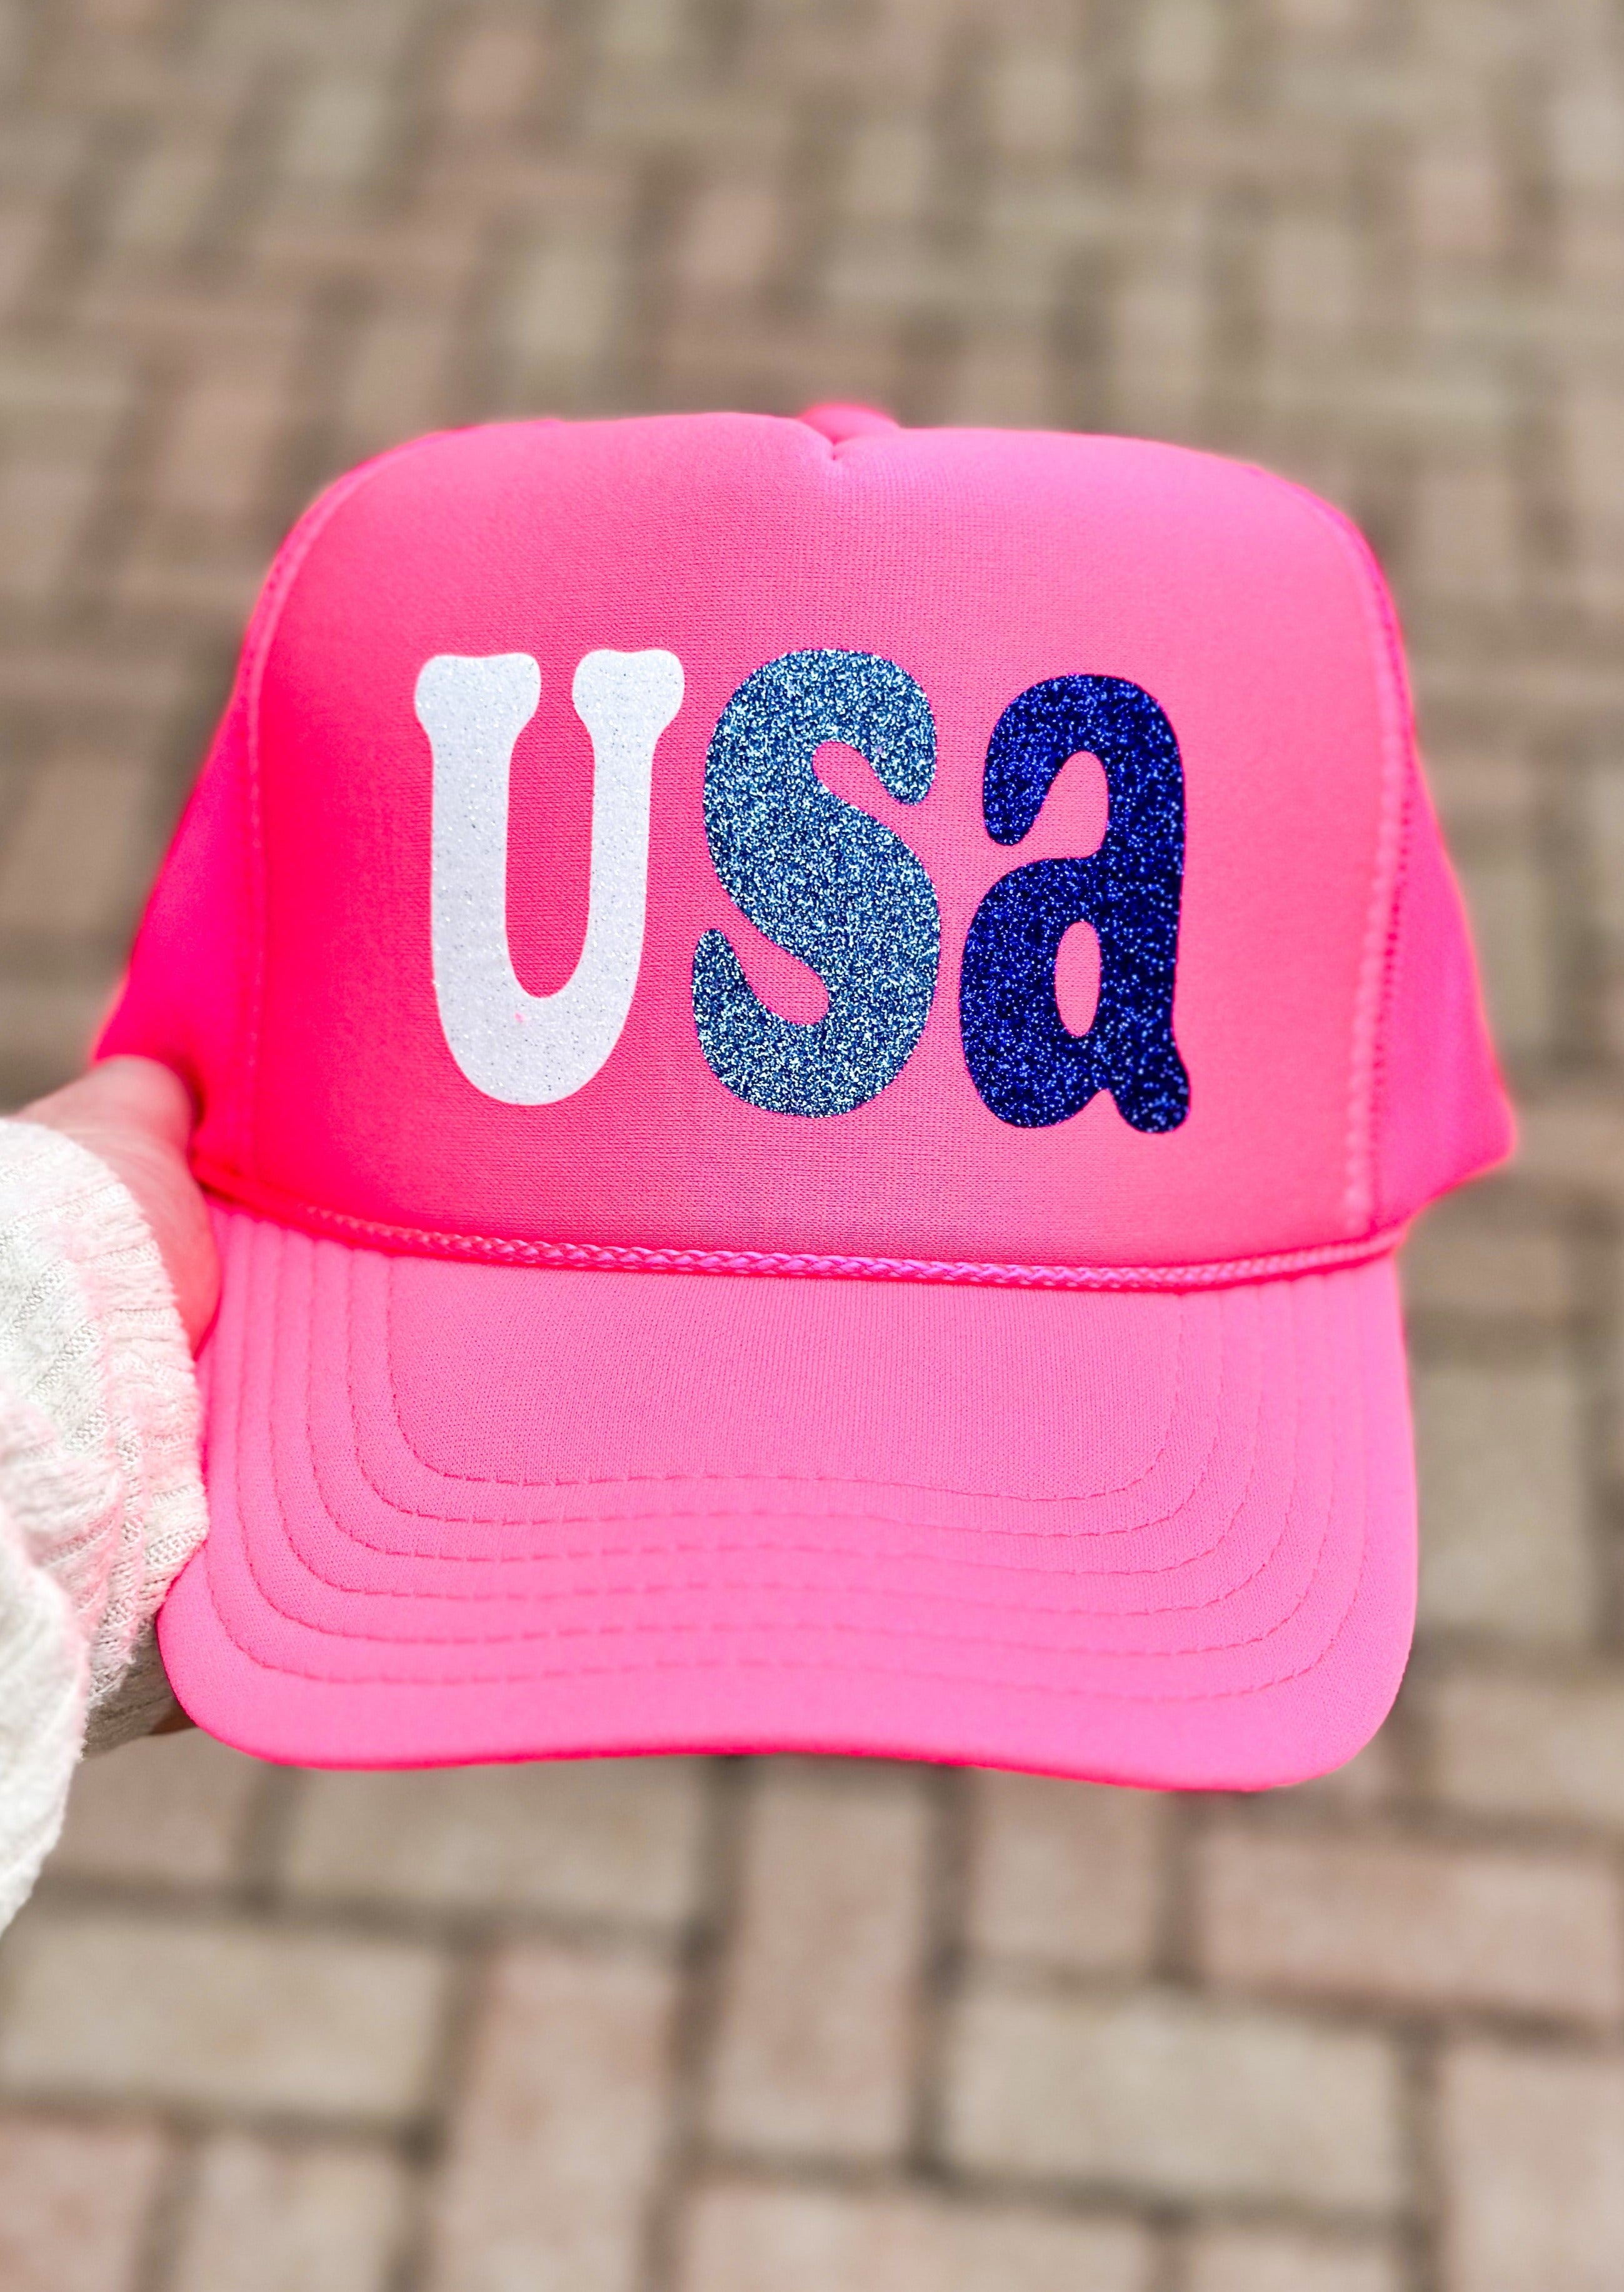 Pink trucker hat with USA across the front in glitter - white U, light blue S, blue a